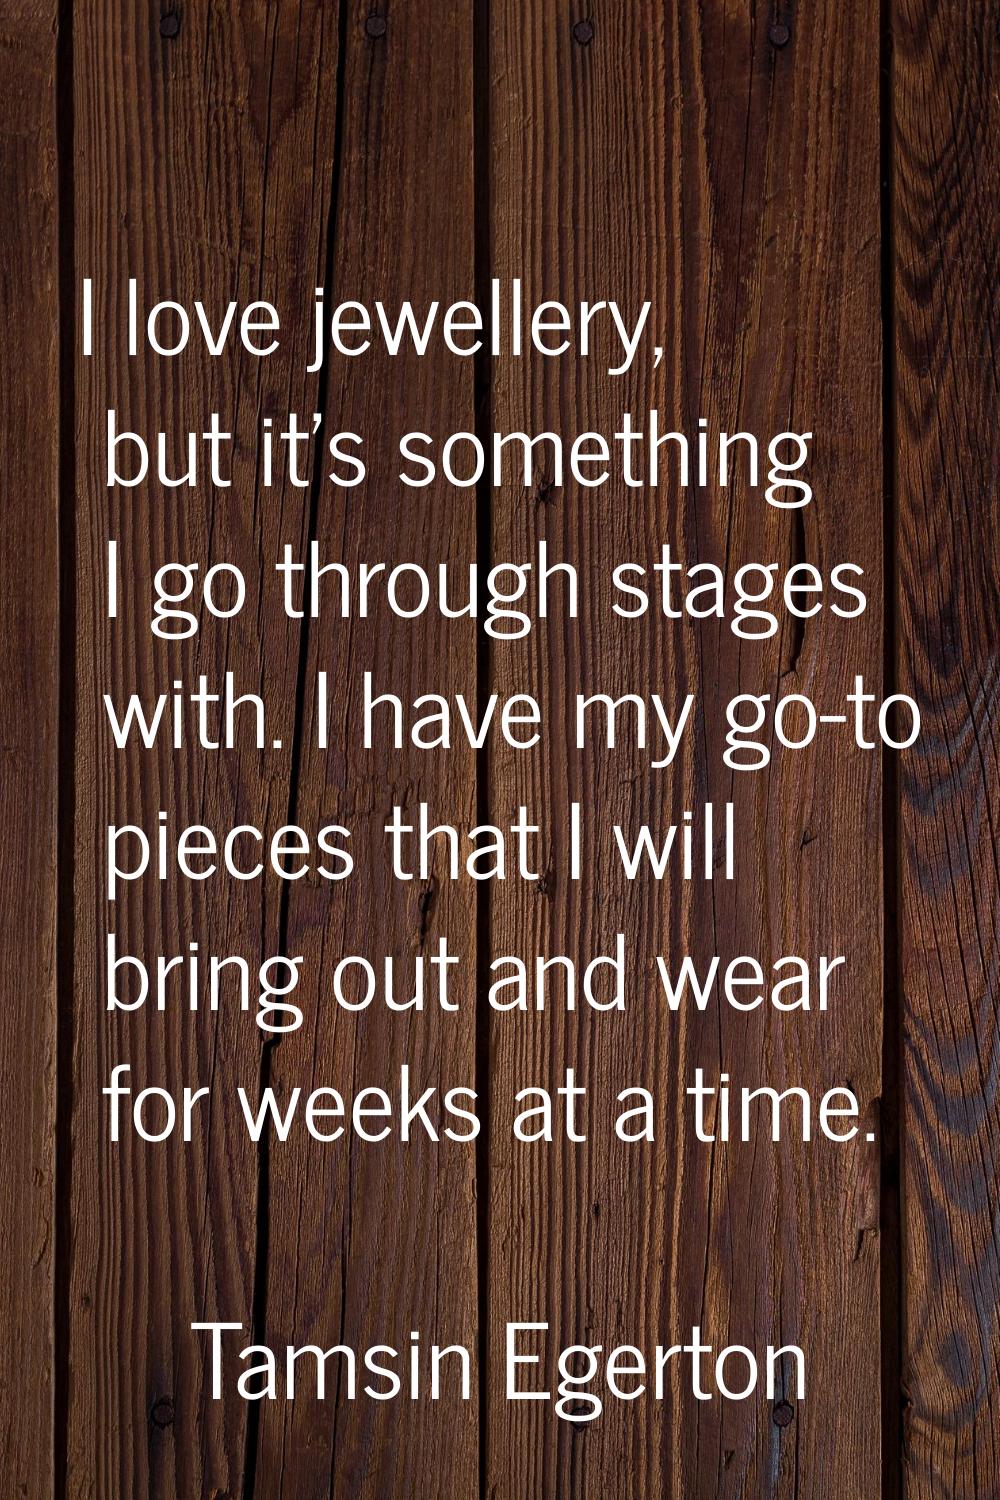 I love jewellery, but it's something I go through stages with. I have my go-to pieces that I will b